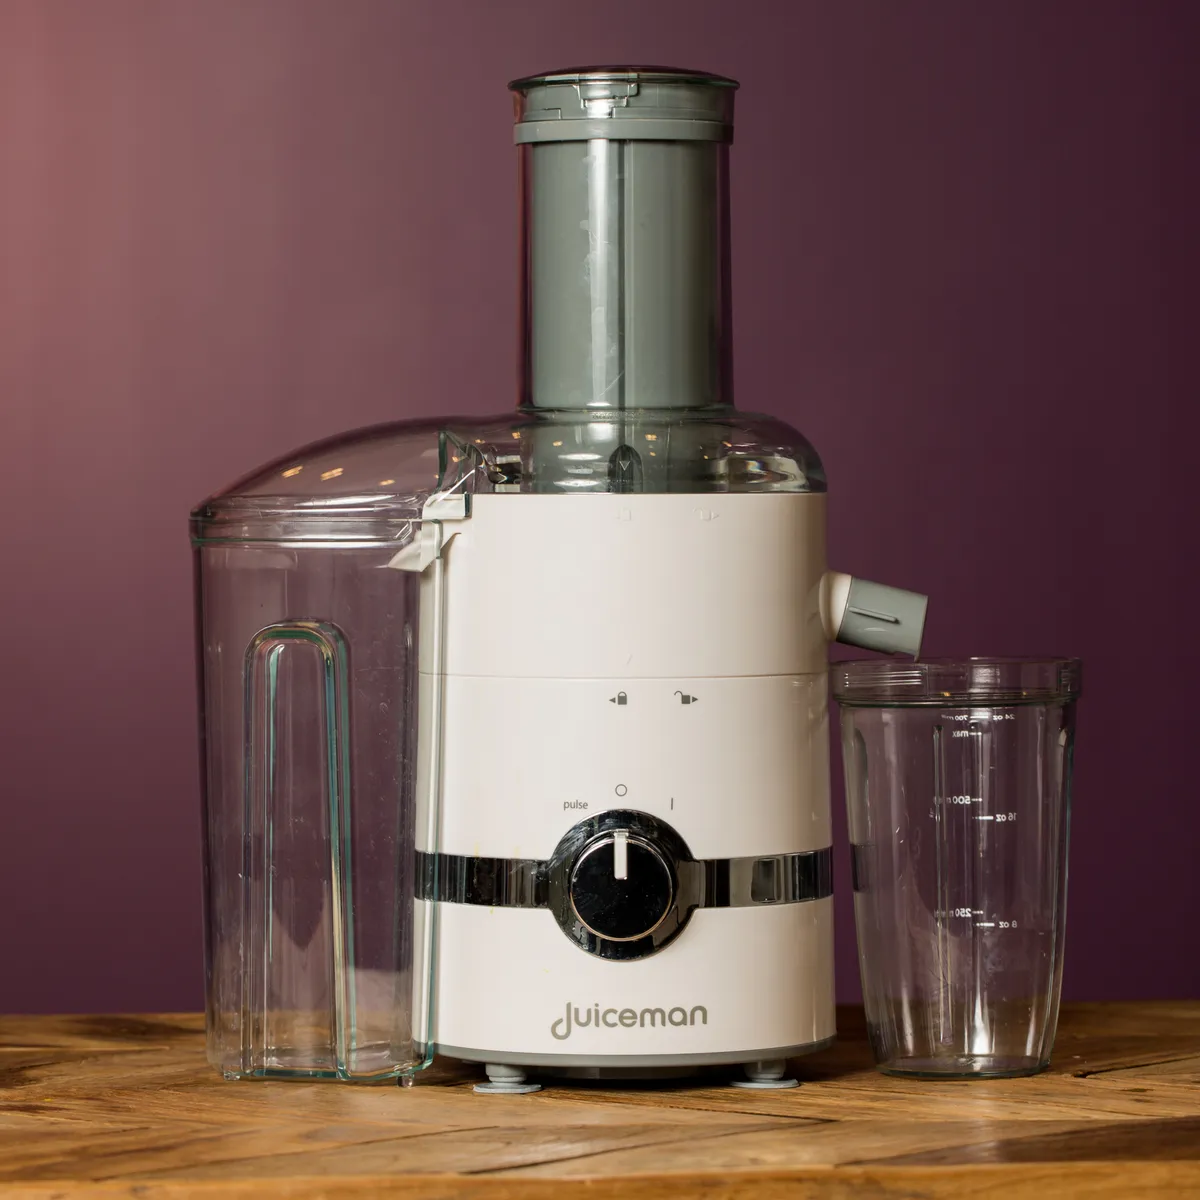 How To Clean A Juiceman Juicer